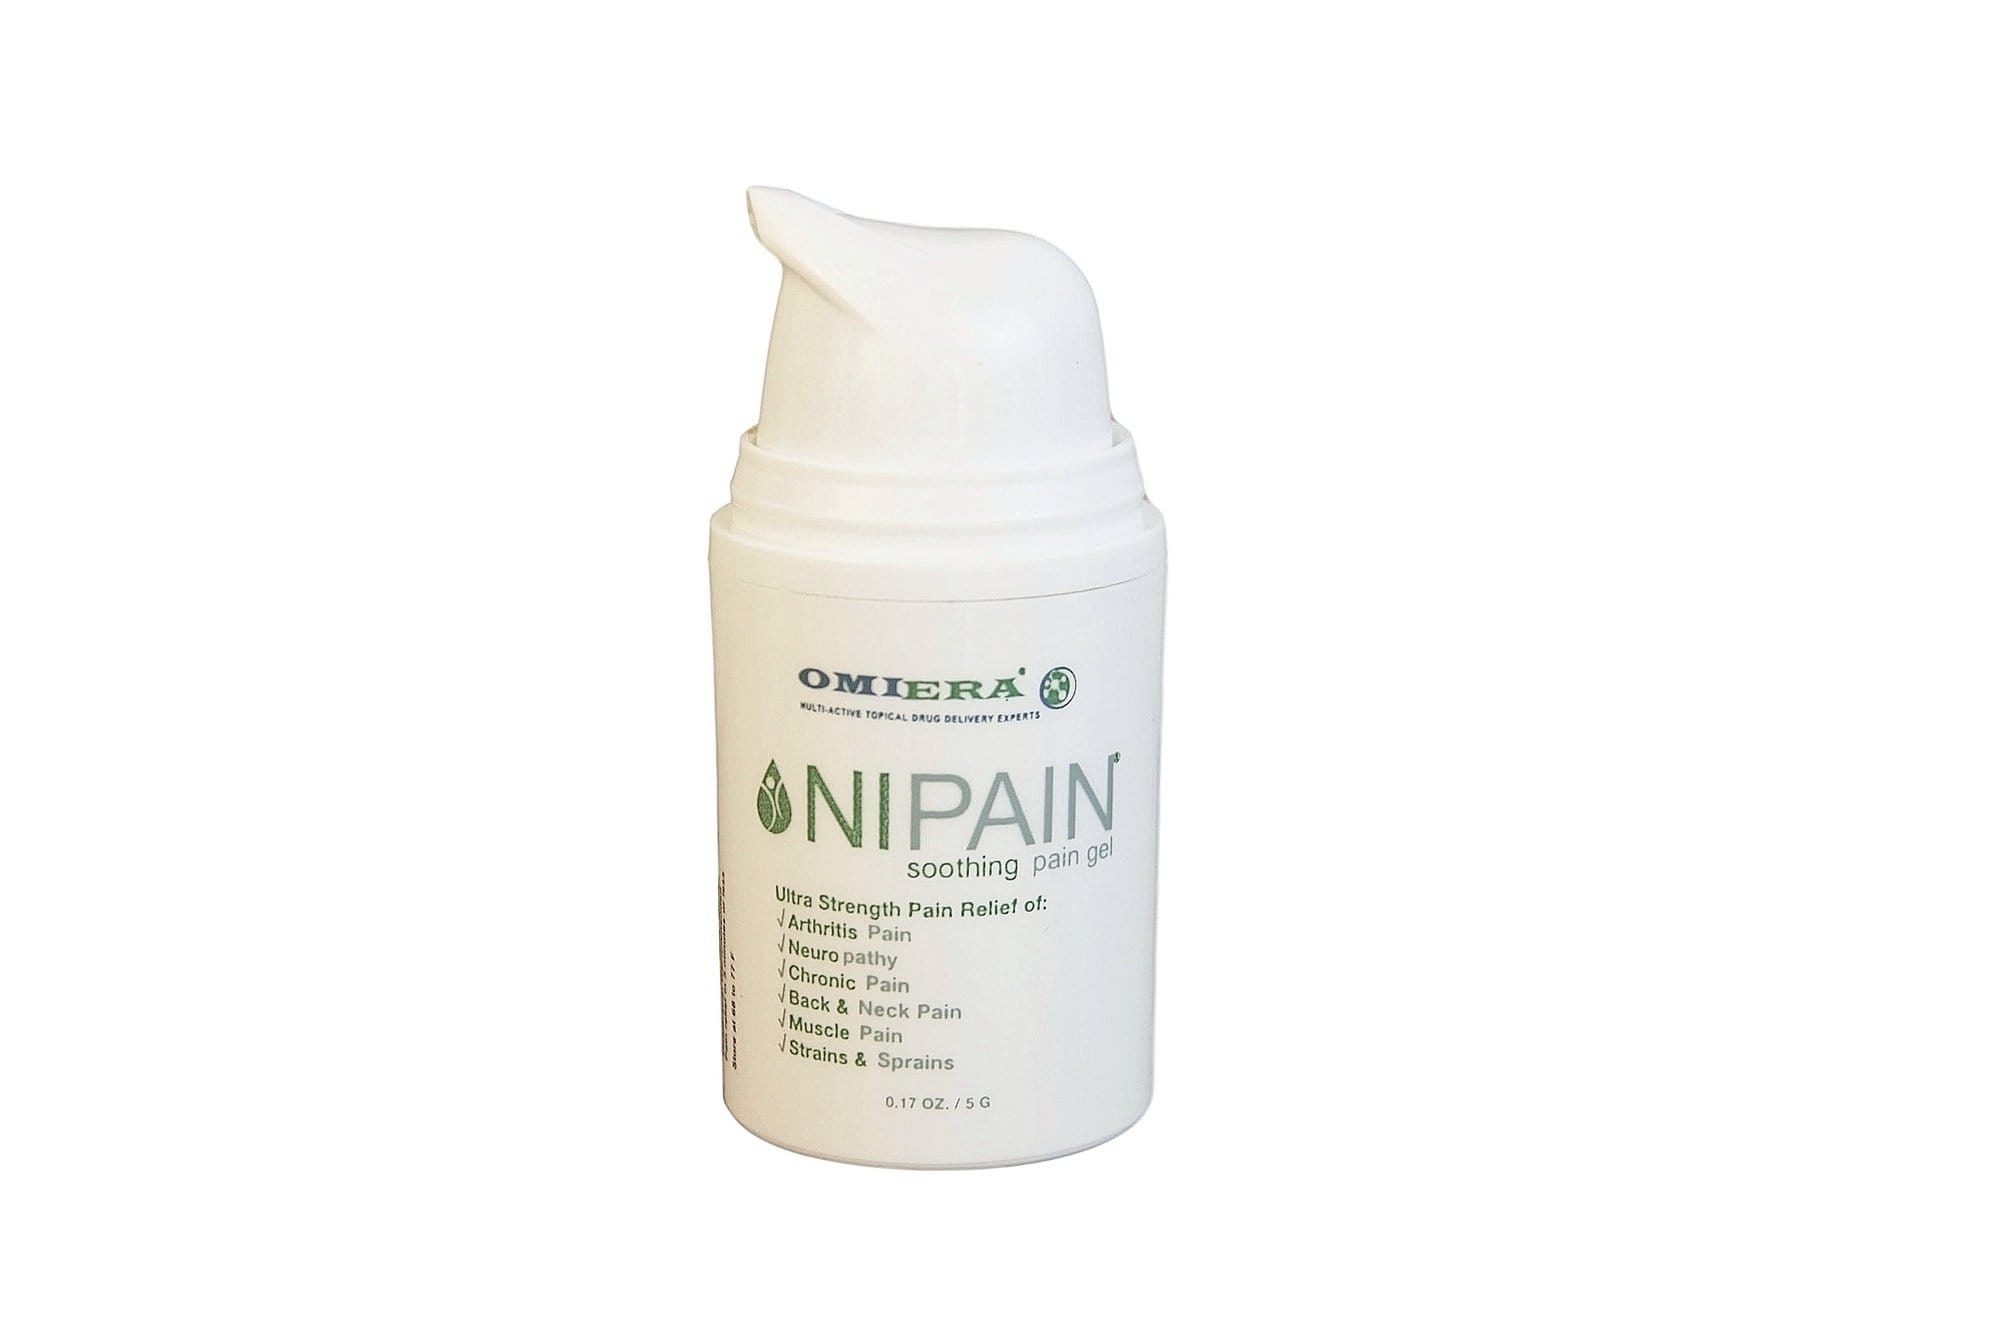 OMIERA LABS CREAM 5 g Omiera Labs Nipain Fast, Natural, and Odor Free, Pain Relief Cream